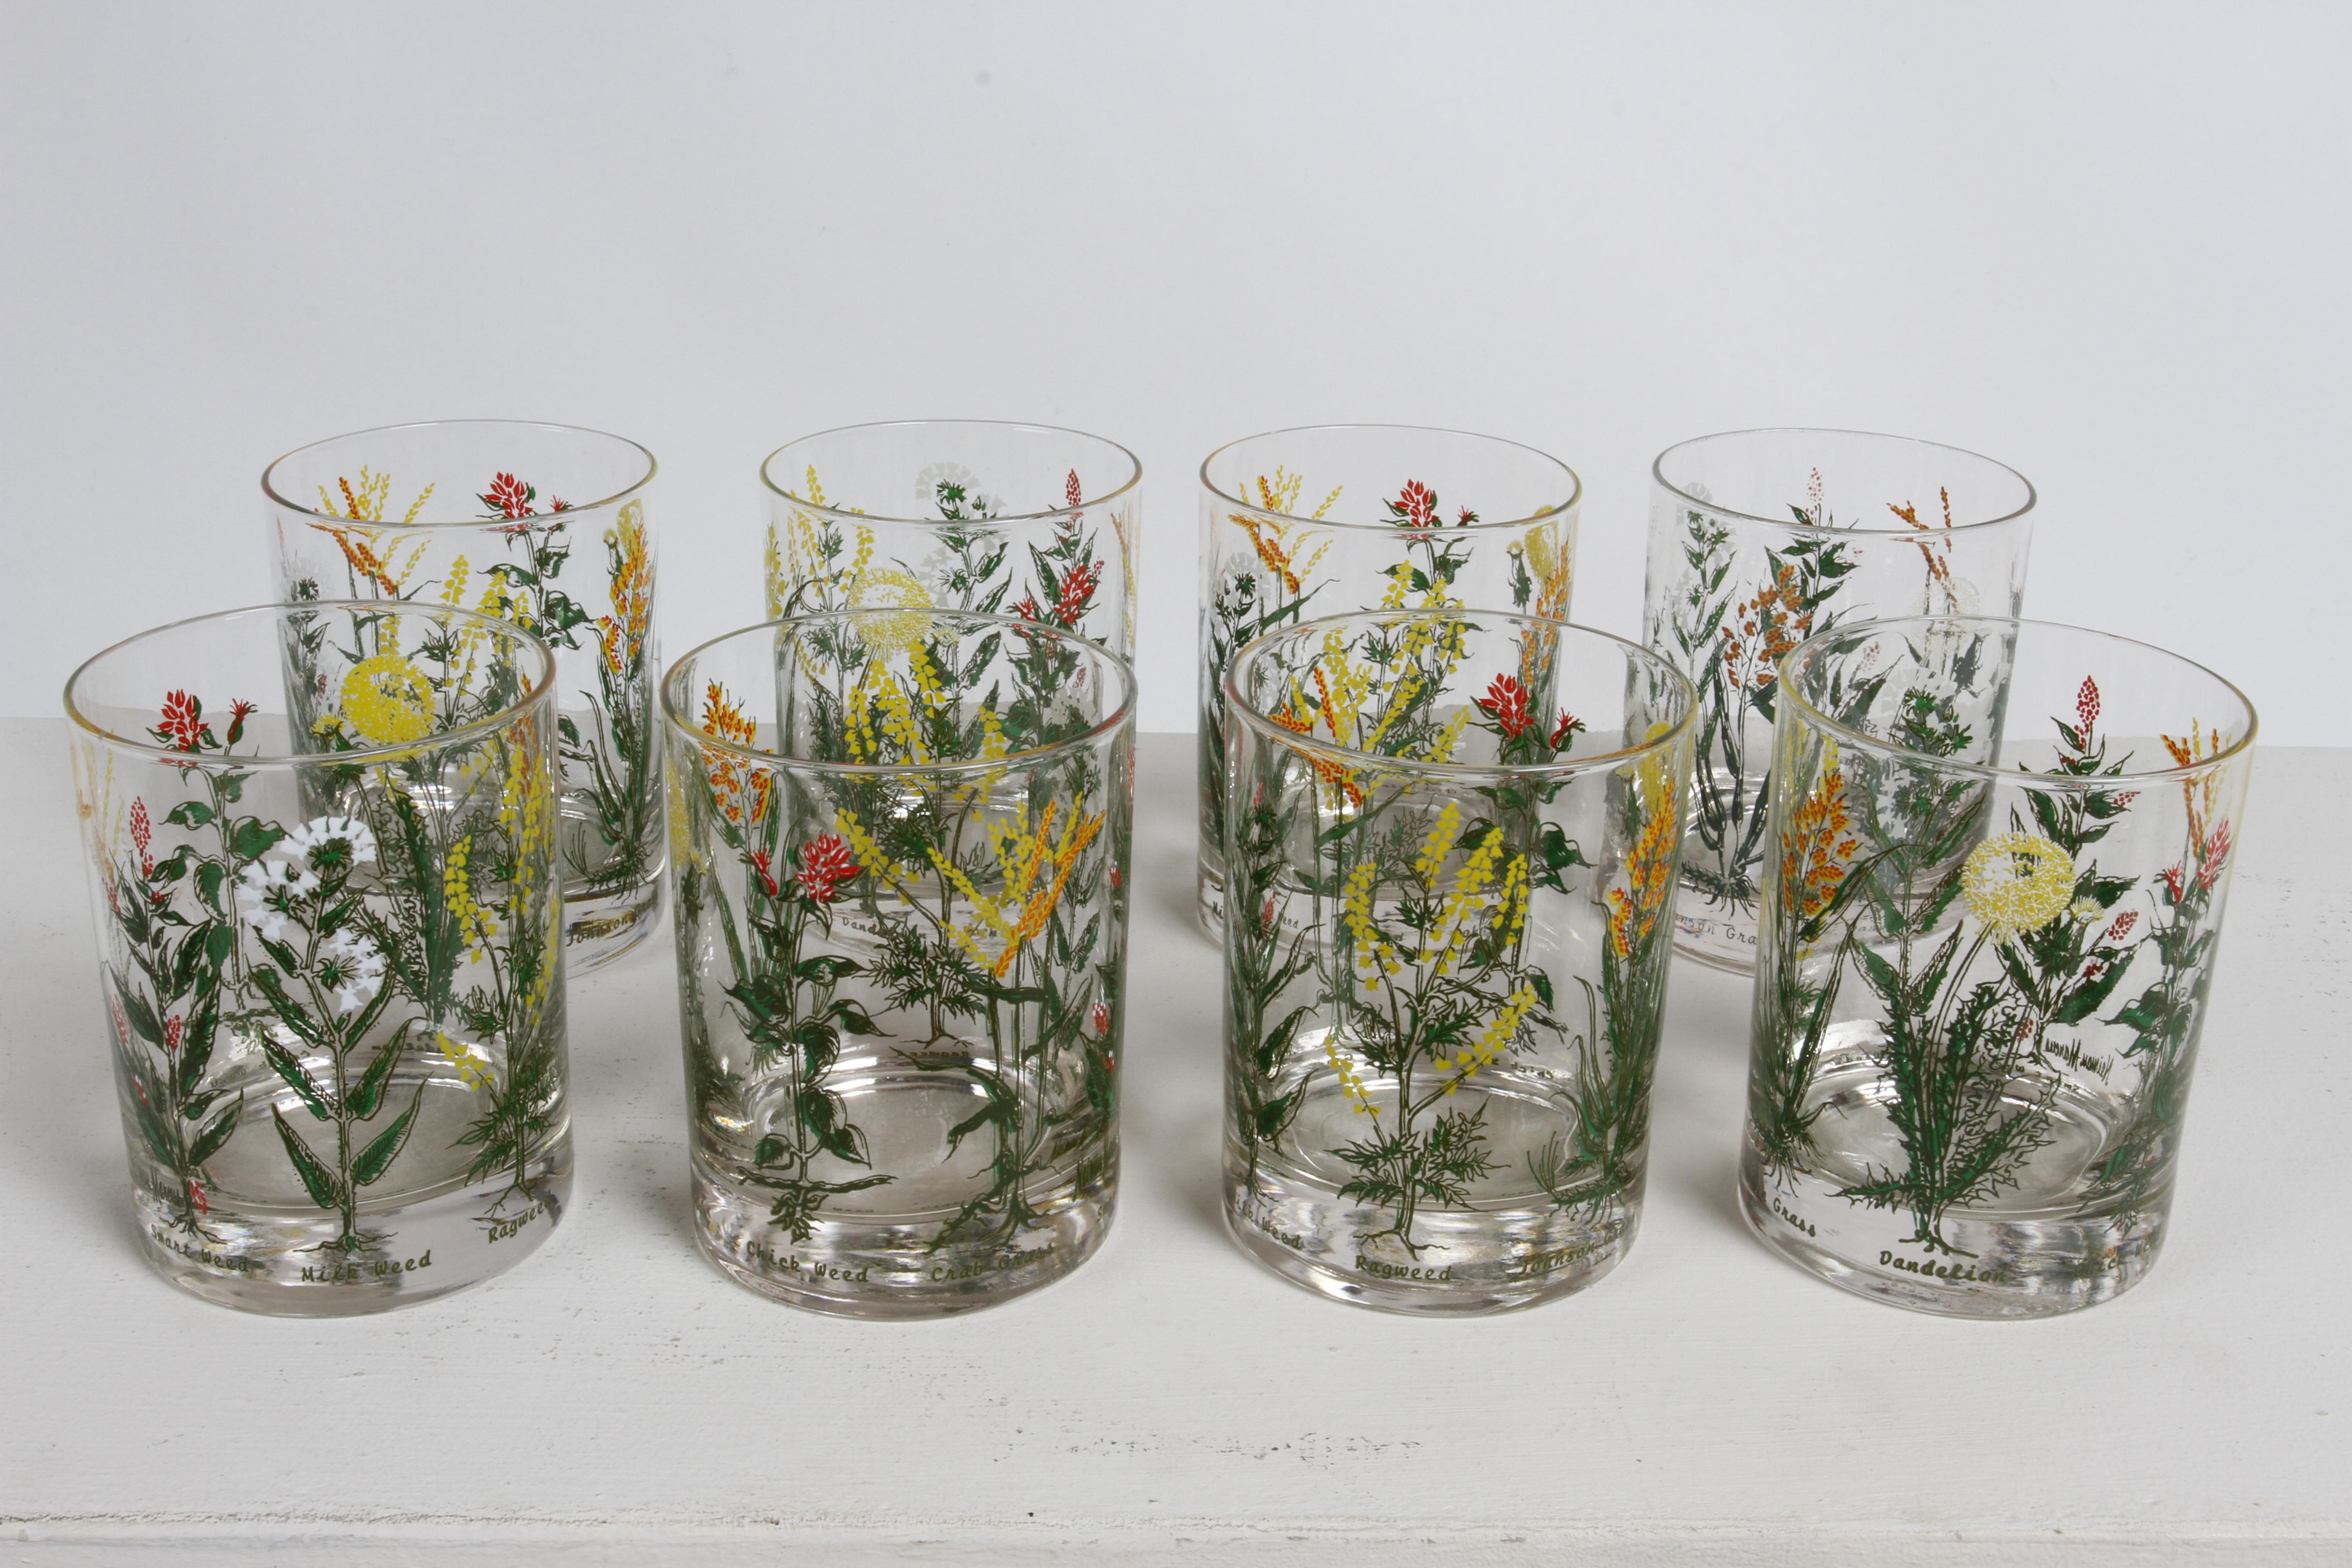 Vintage 1980s barware by Neiman Marcus, set of six rocks glasses with botanical grass themed designs. Includes Dandelion , Chick Weed, Crabgrass, Smart Weed, Milkweed, Ragweed, Johnson Grass. Printed in greed Neiman Marcus. One glass, does appear to